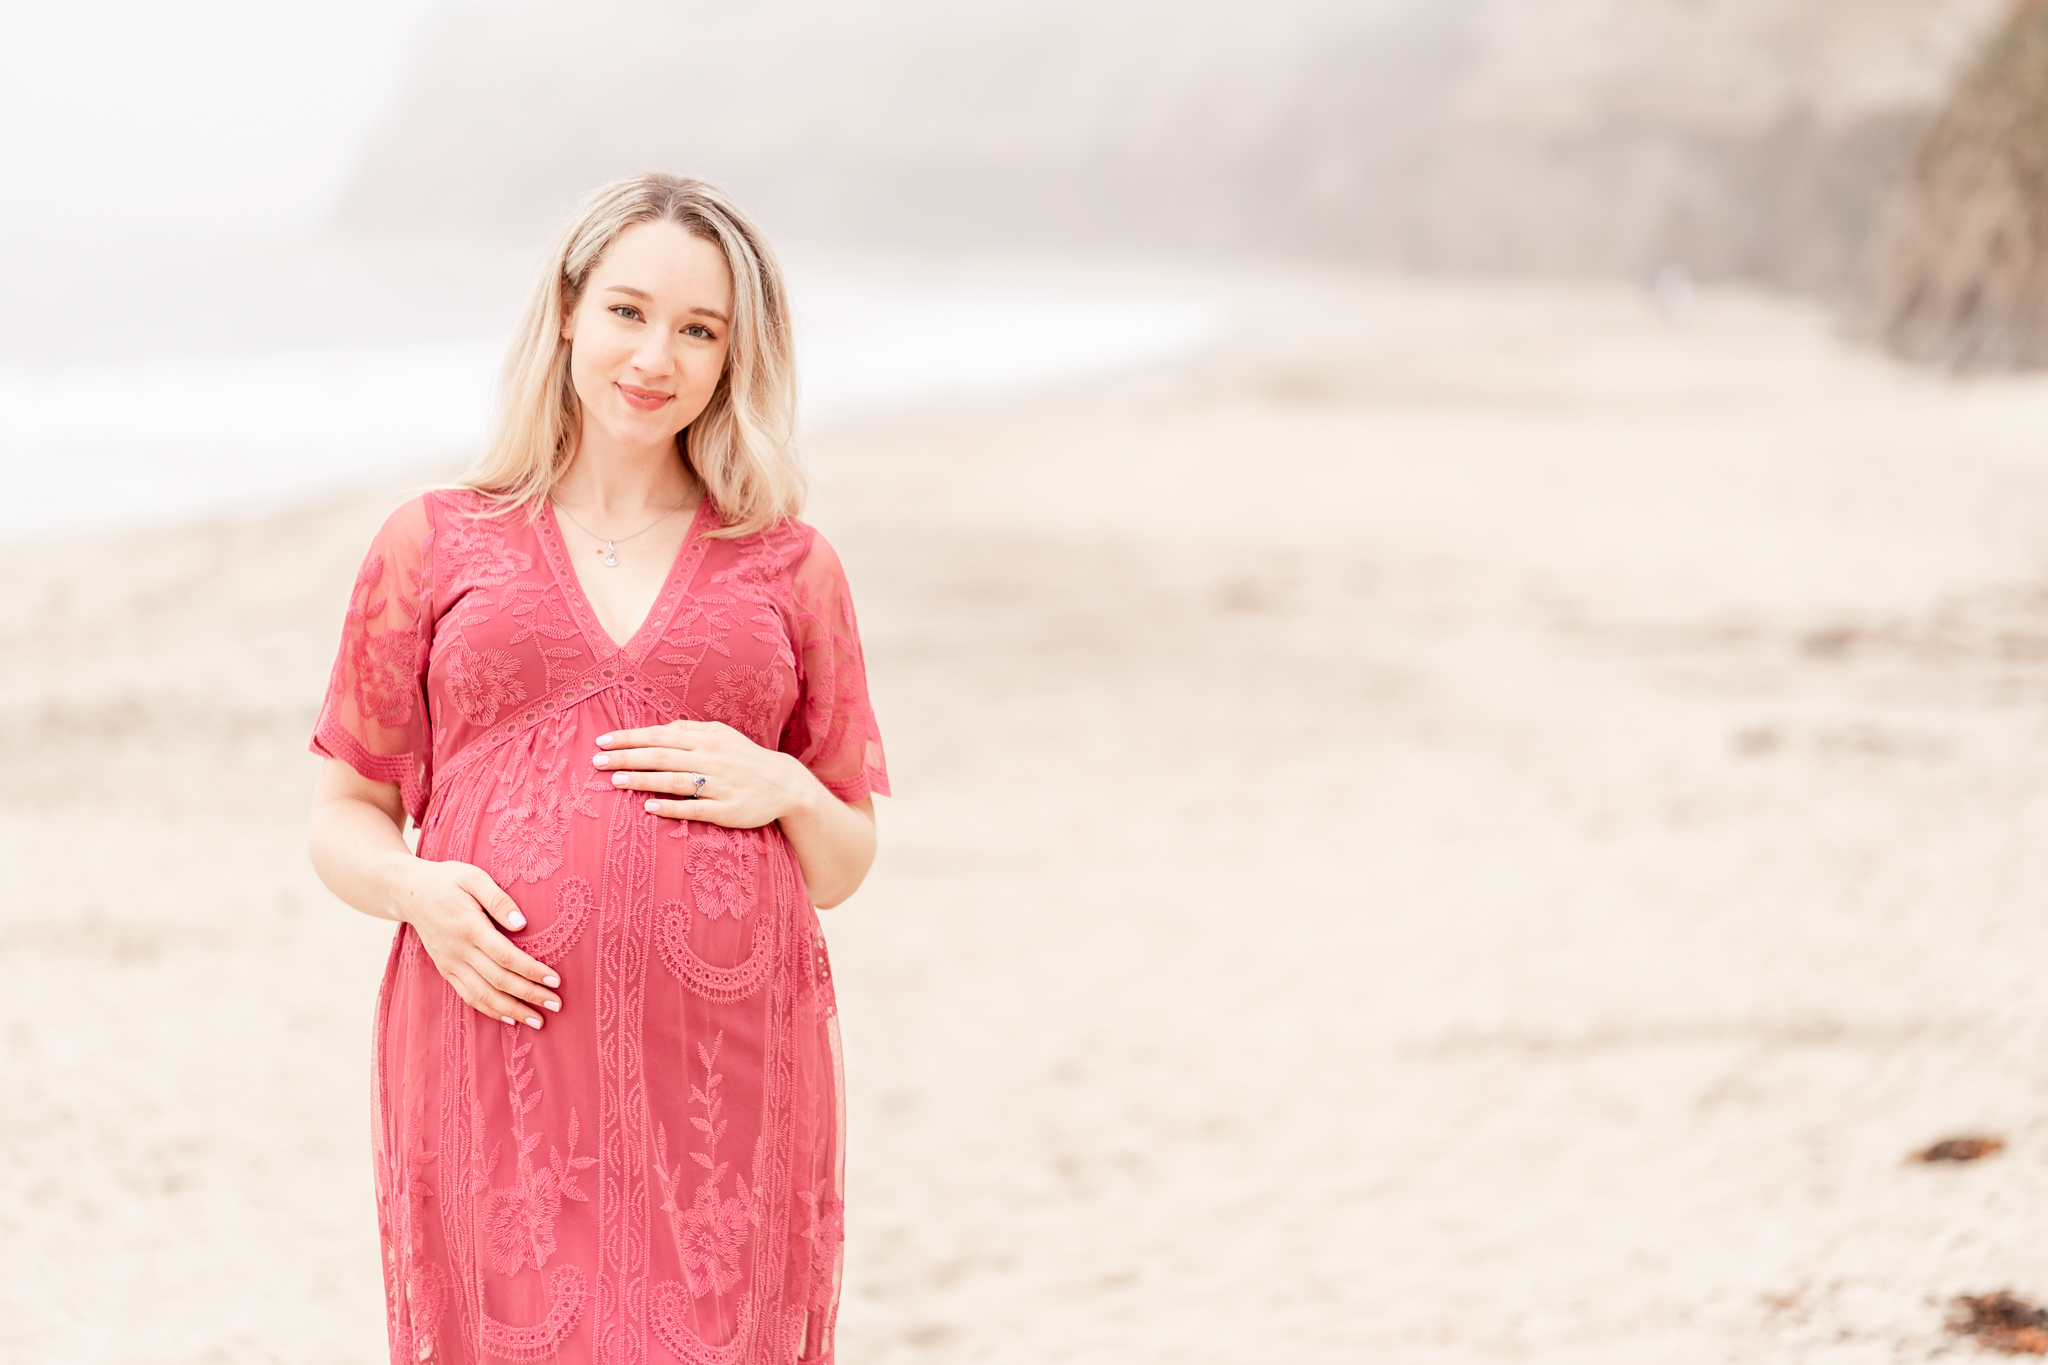 Pregnant woman standing on a beach wearing a pink dress and smiling at the camera